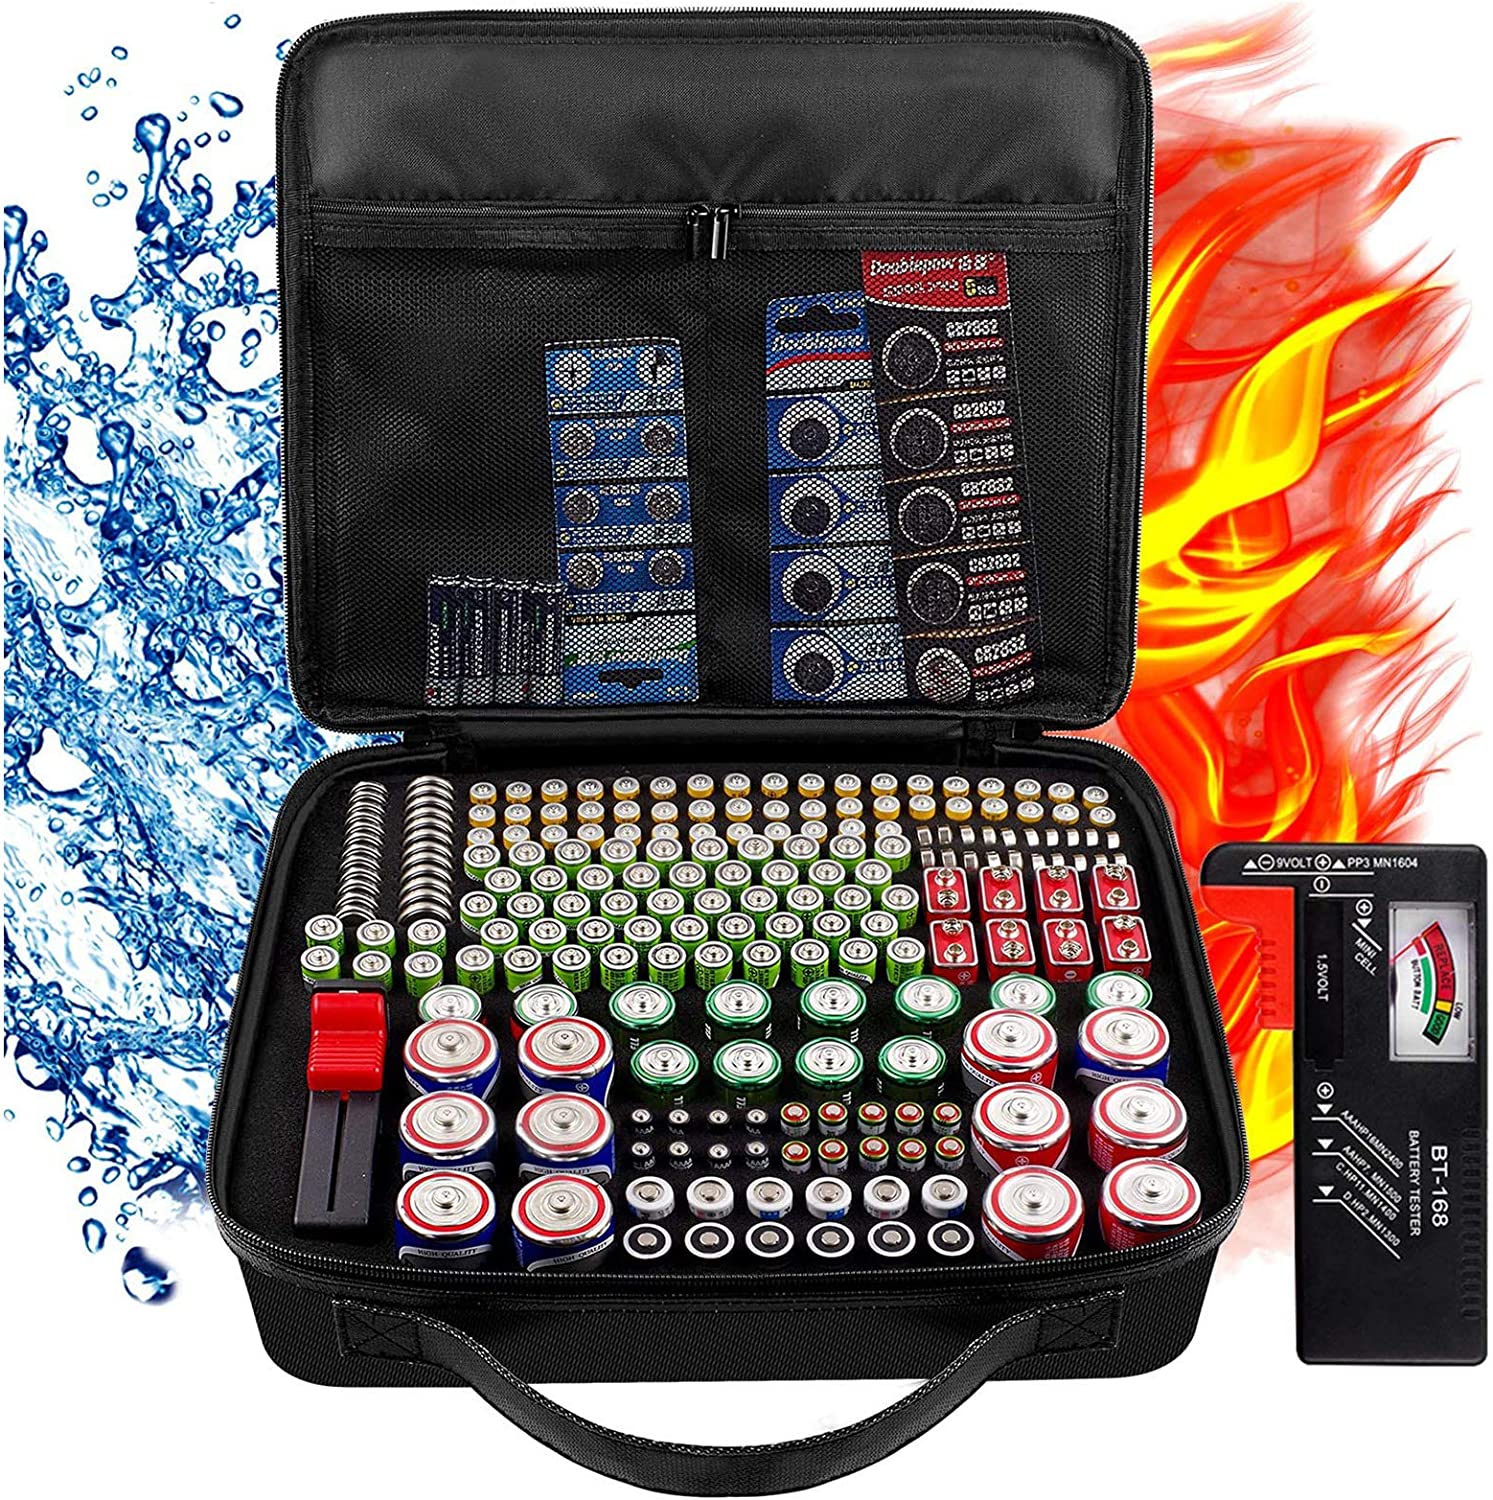 Battery Organizer Storage Case with Battery Tester, 250+ Waterproof Ex –  PAIYULE